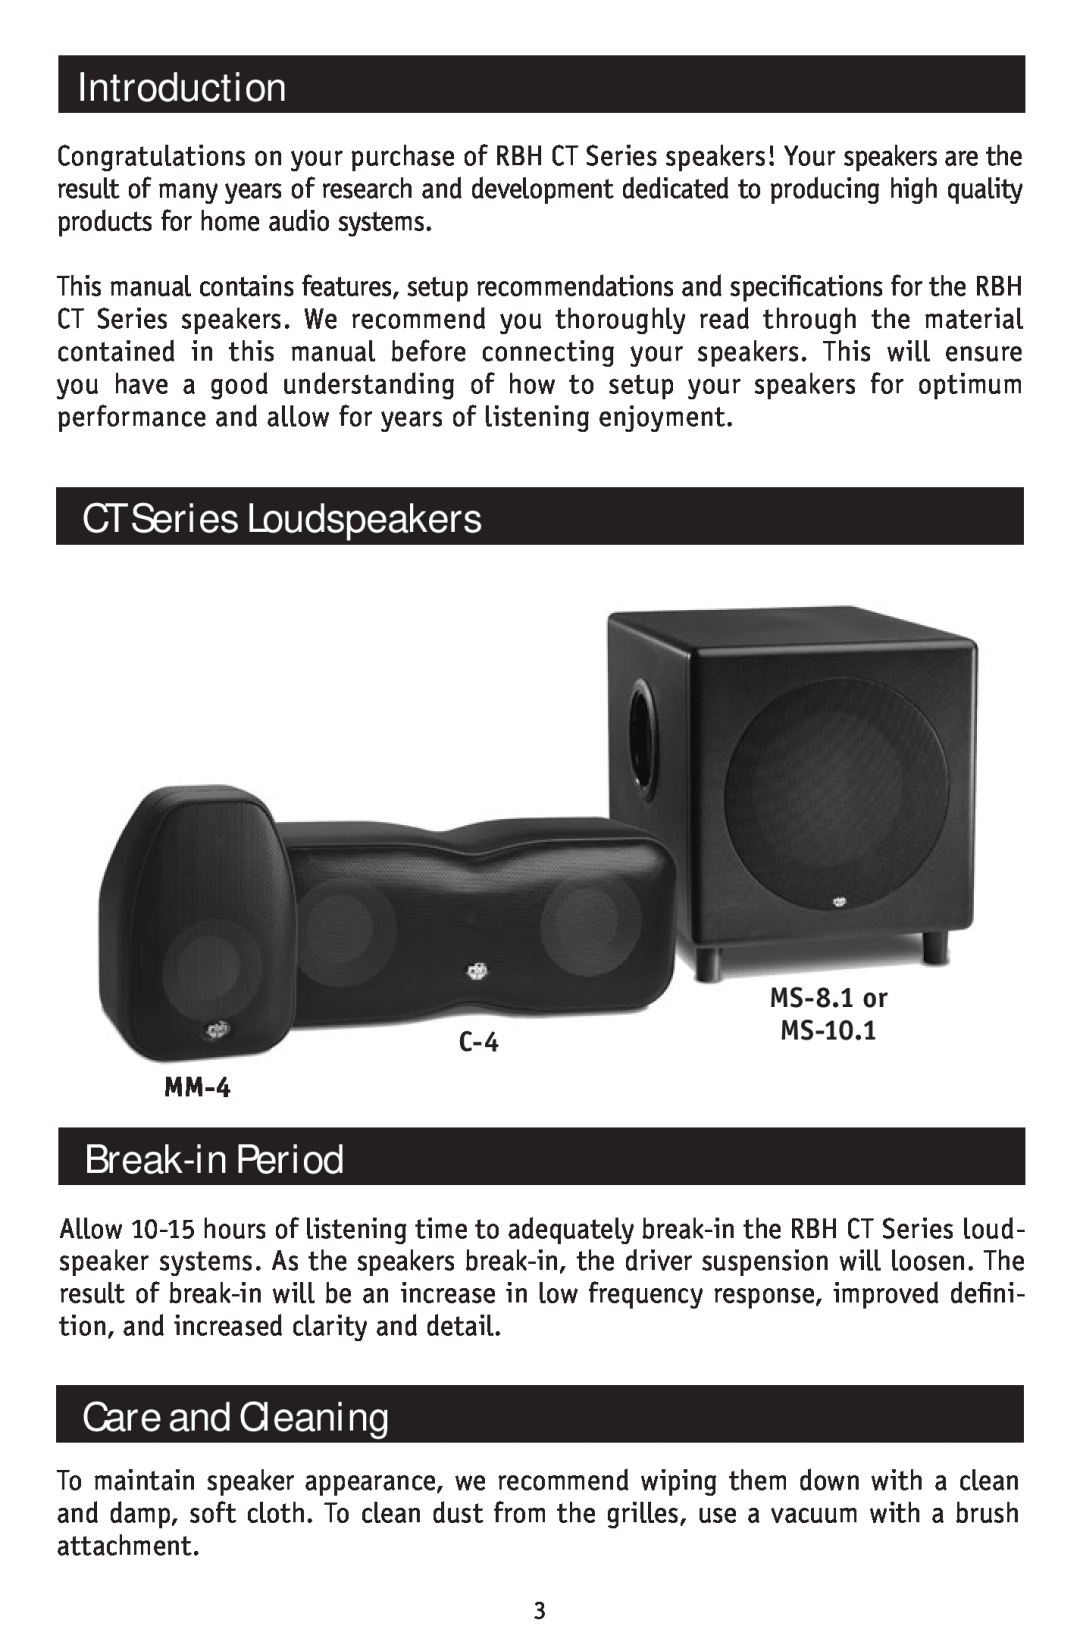 RBH Sound CT-5, CT-7 owner manual Introduction, CT Series Loudspeakers, Break-inPeriod, Care and Cleaning, MM-4 